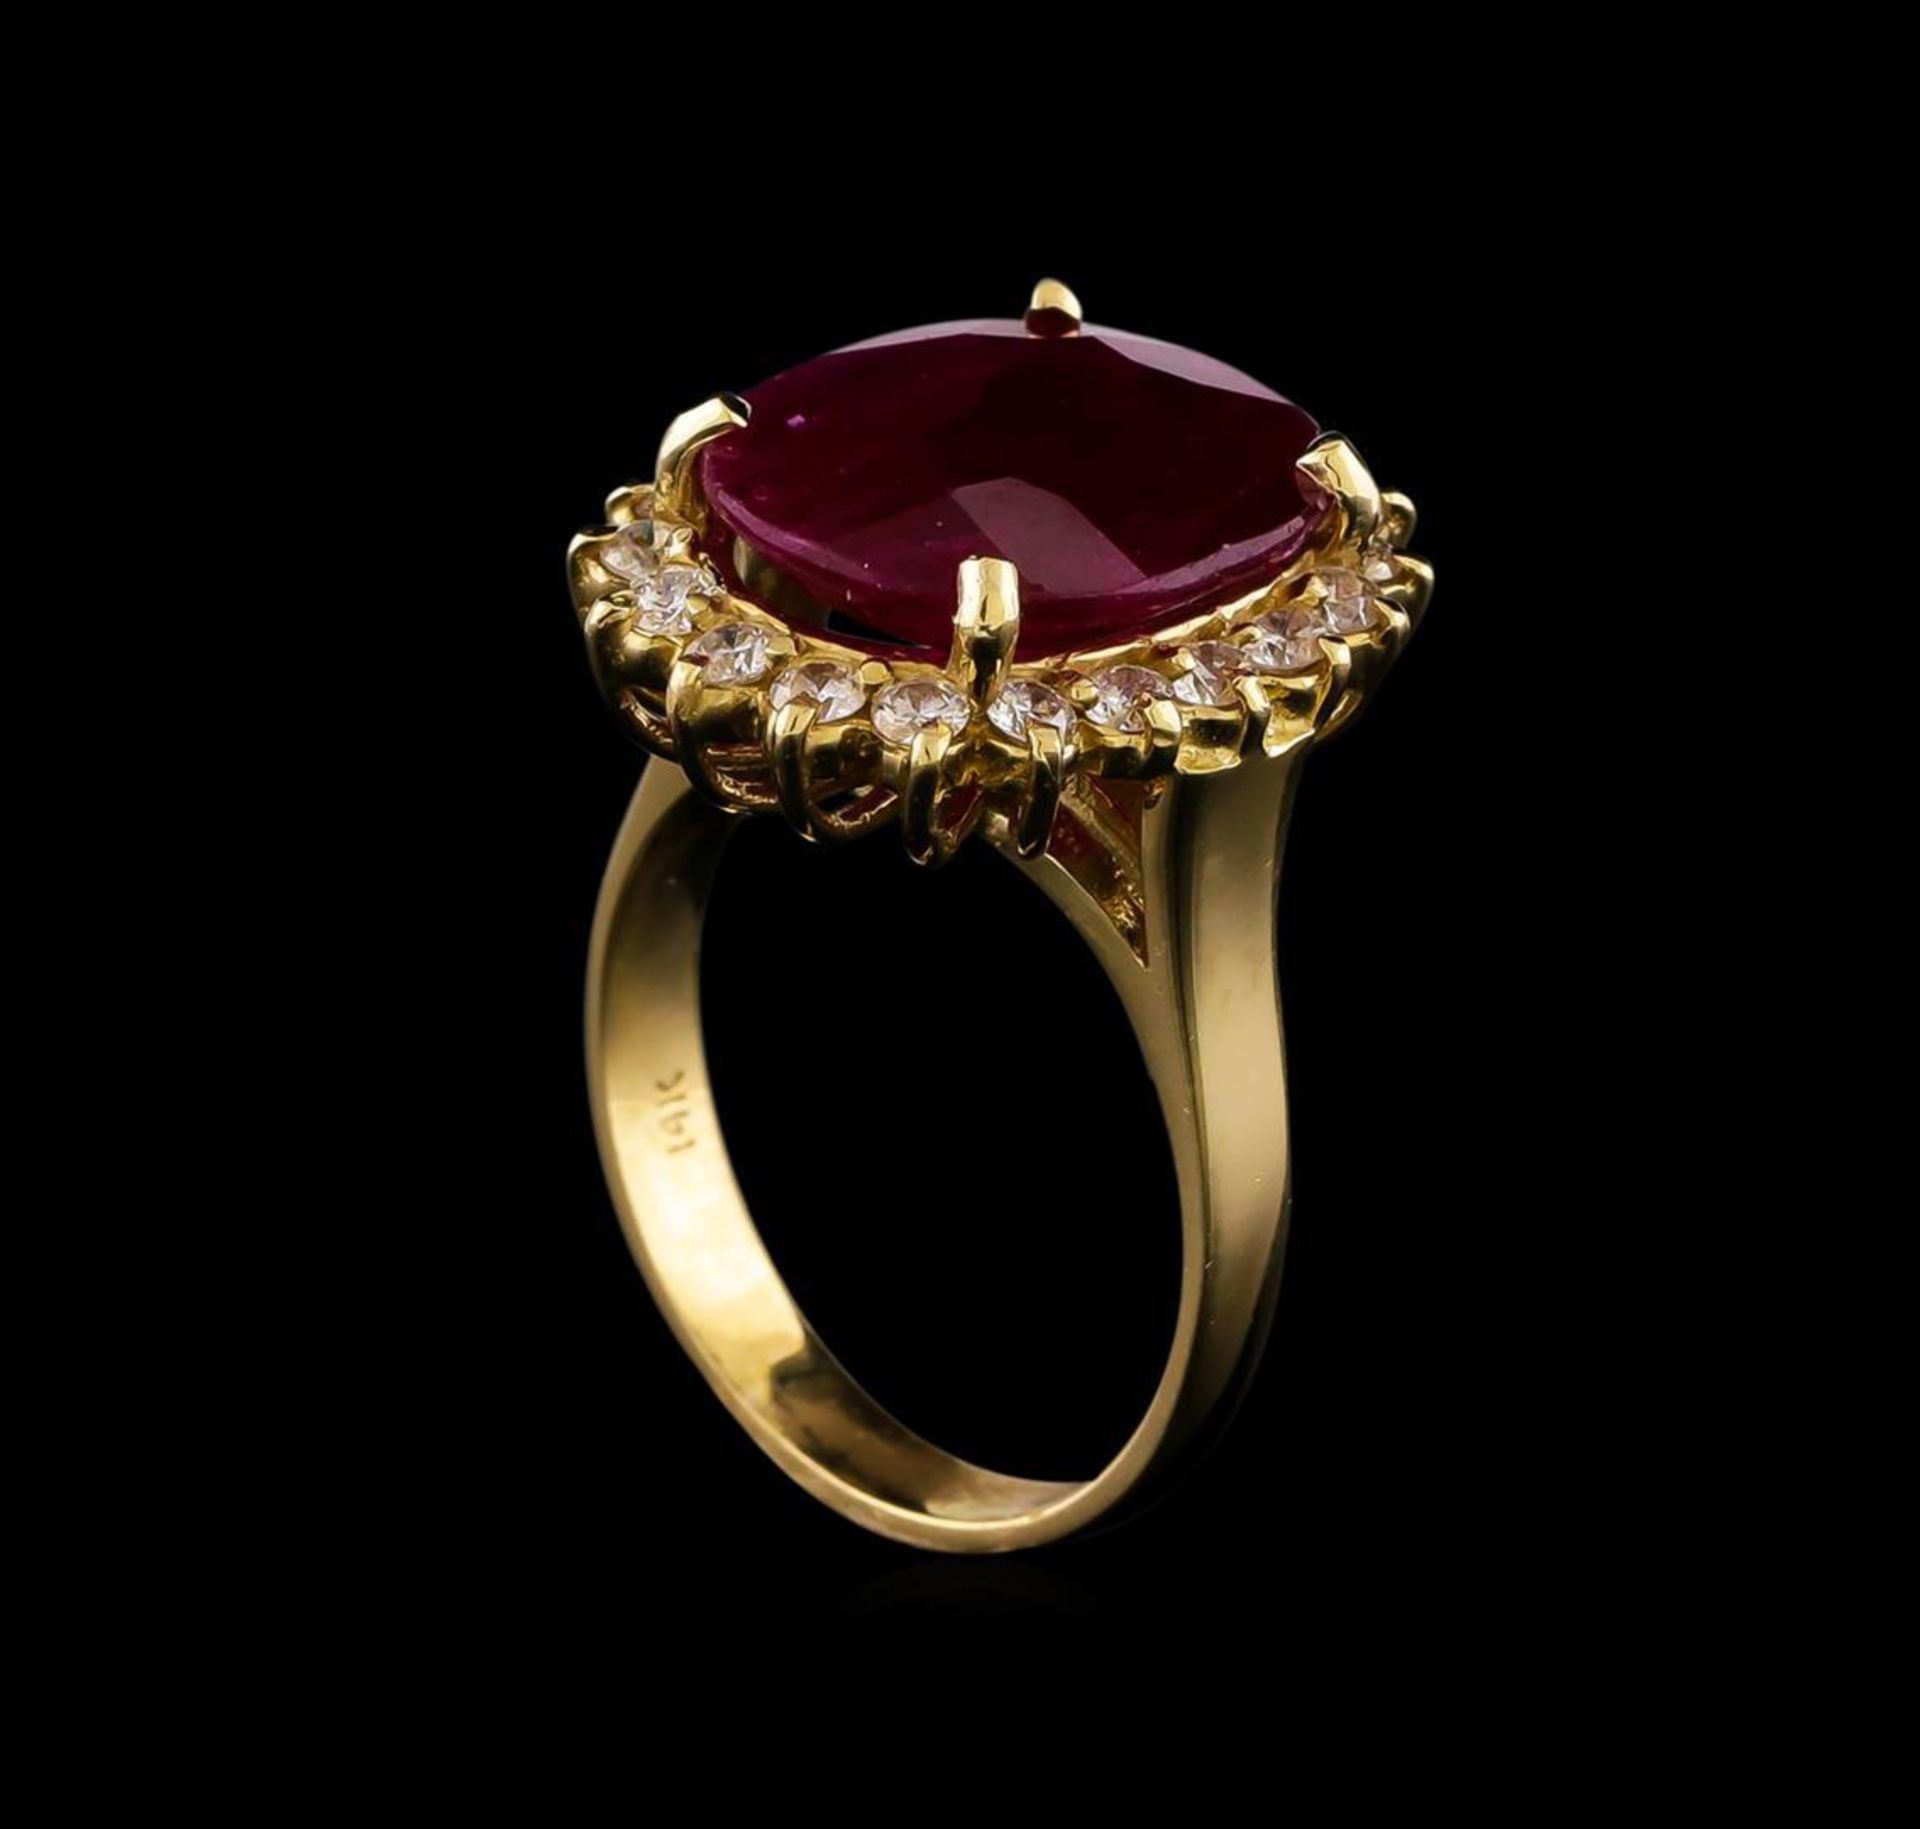 GIA Cert 6.96 ctw Ruby and Diamond Ring - 14KT Yellow Gold - Image 4 of 6